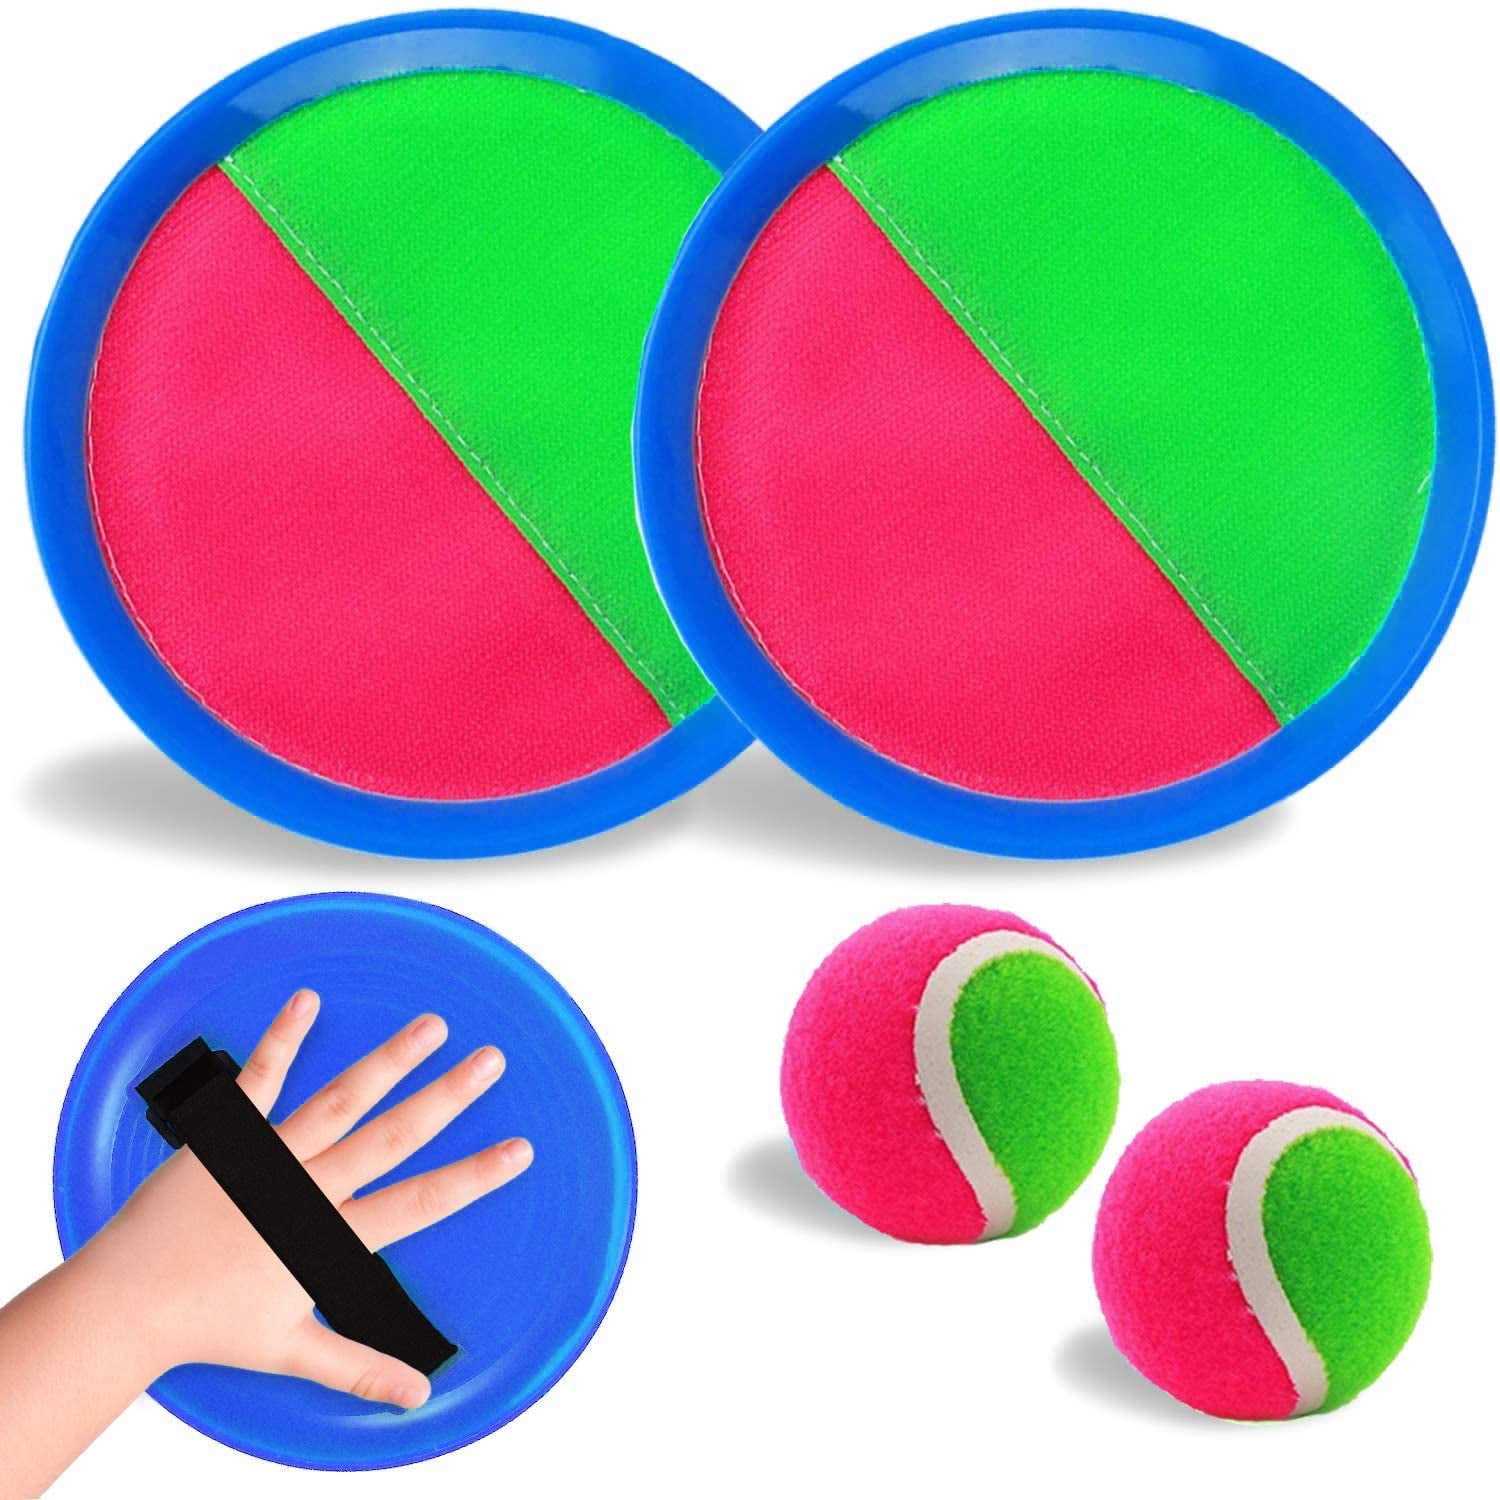 random Color Catch a Ball Set Camping & Beach Launch and Catch the Ball Game Classic Kids Outdoor Party Game for Lawn